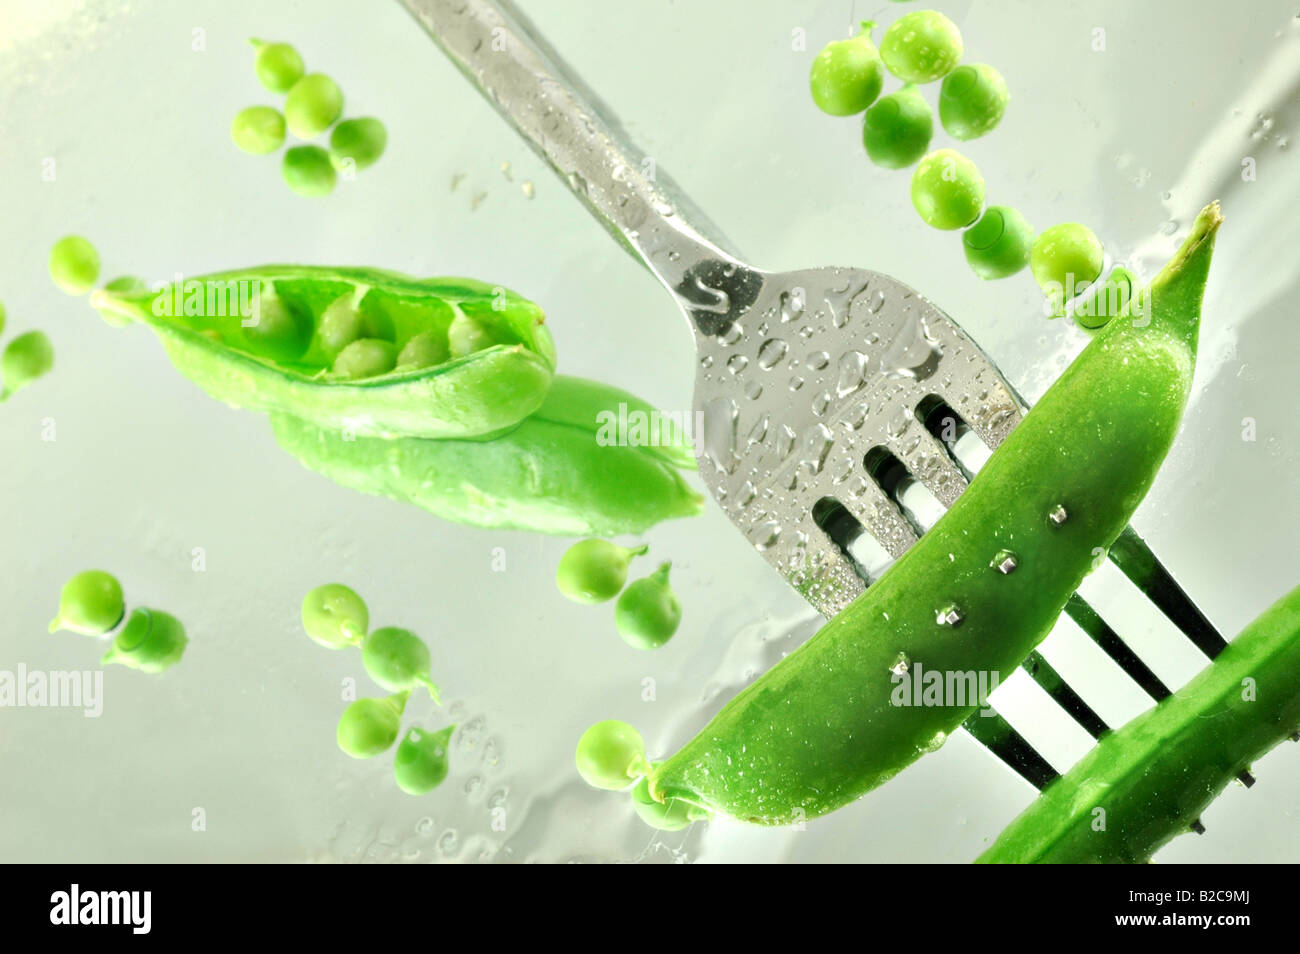 Fresh sugar peas on a mirrored background with a fork Stock Photo